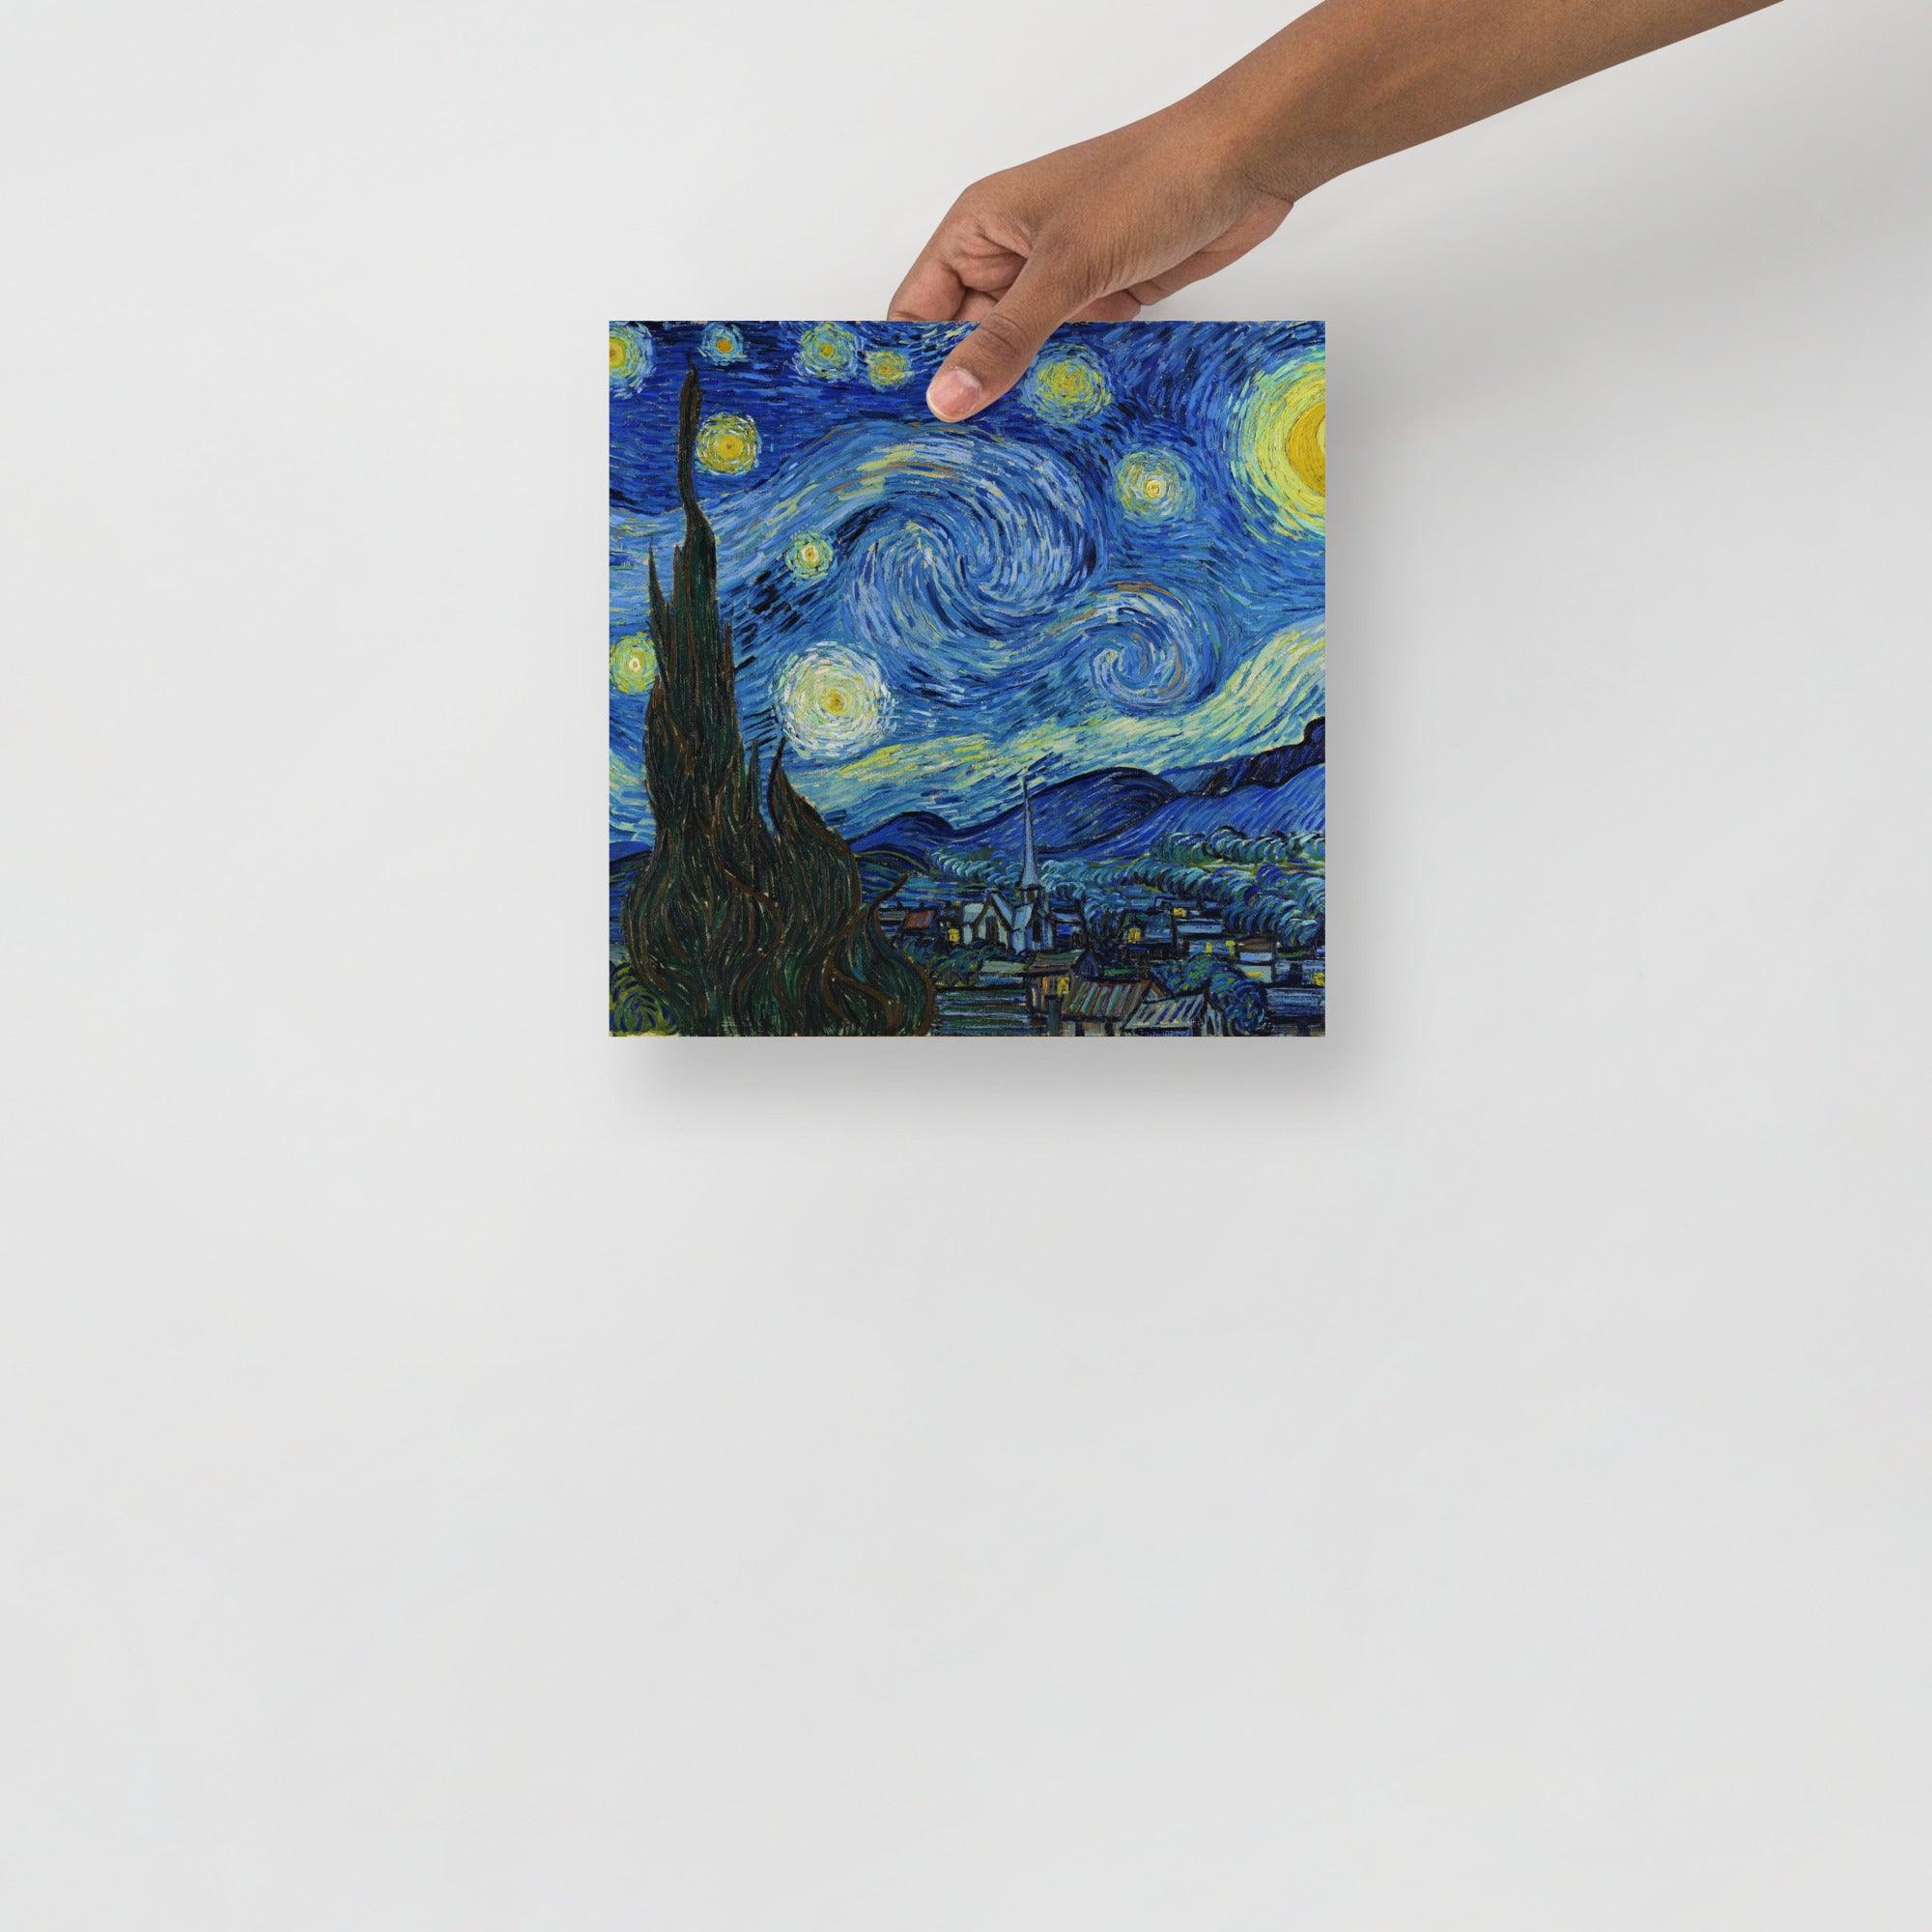 A The Starry Night by Vincent van Gogh poster on a plain backdrop in size 10x10”.